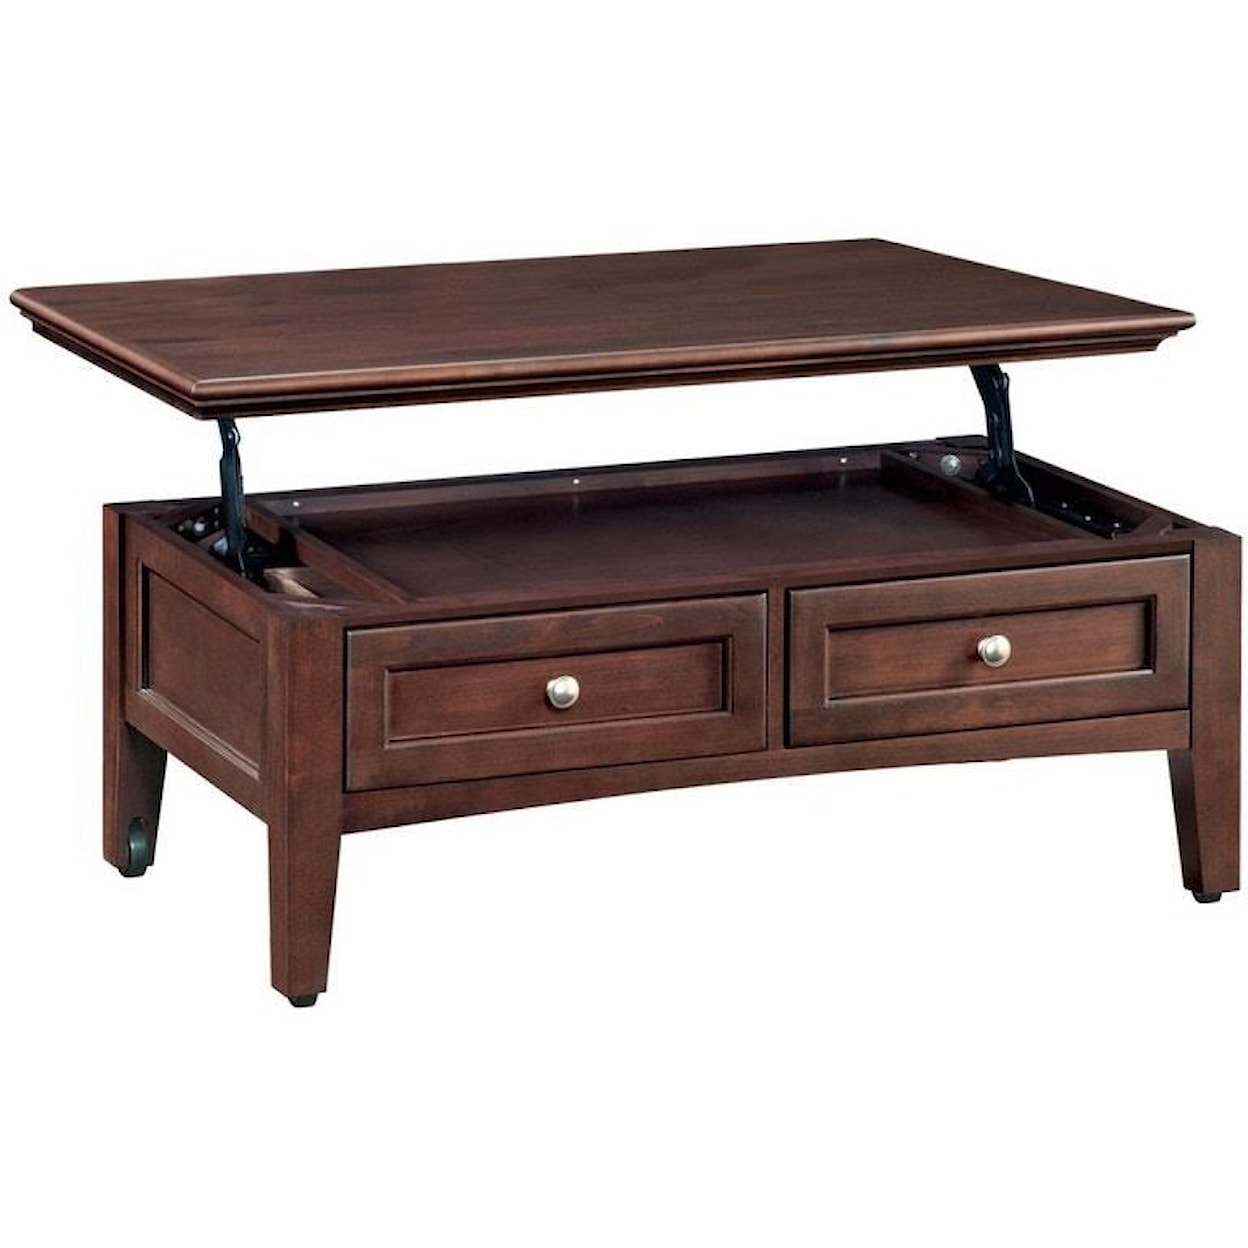 Whittier Wood McKenzie Cafe  Lift Top Coffee Table